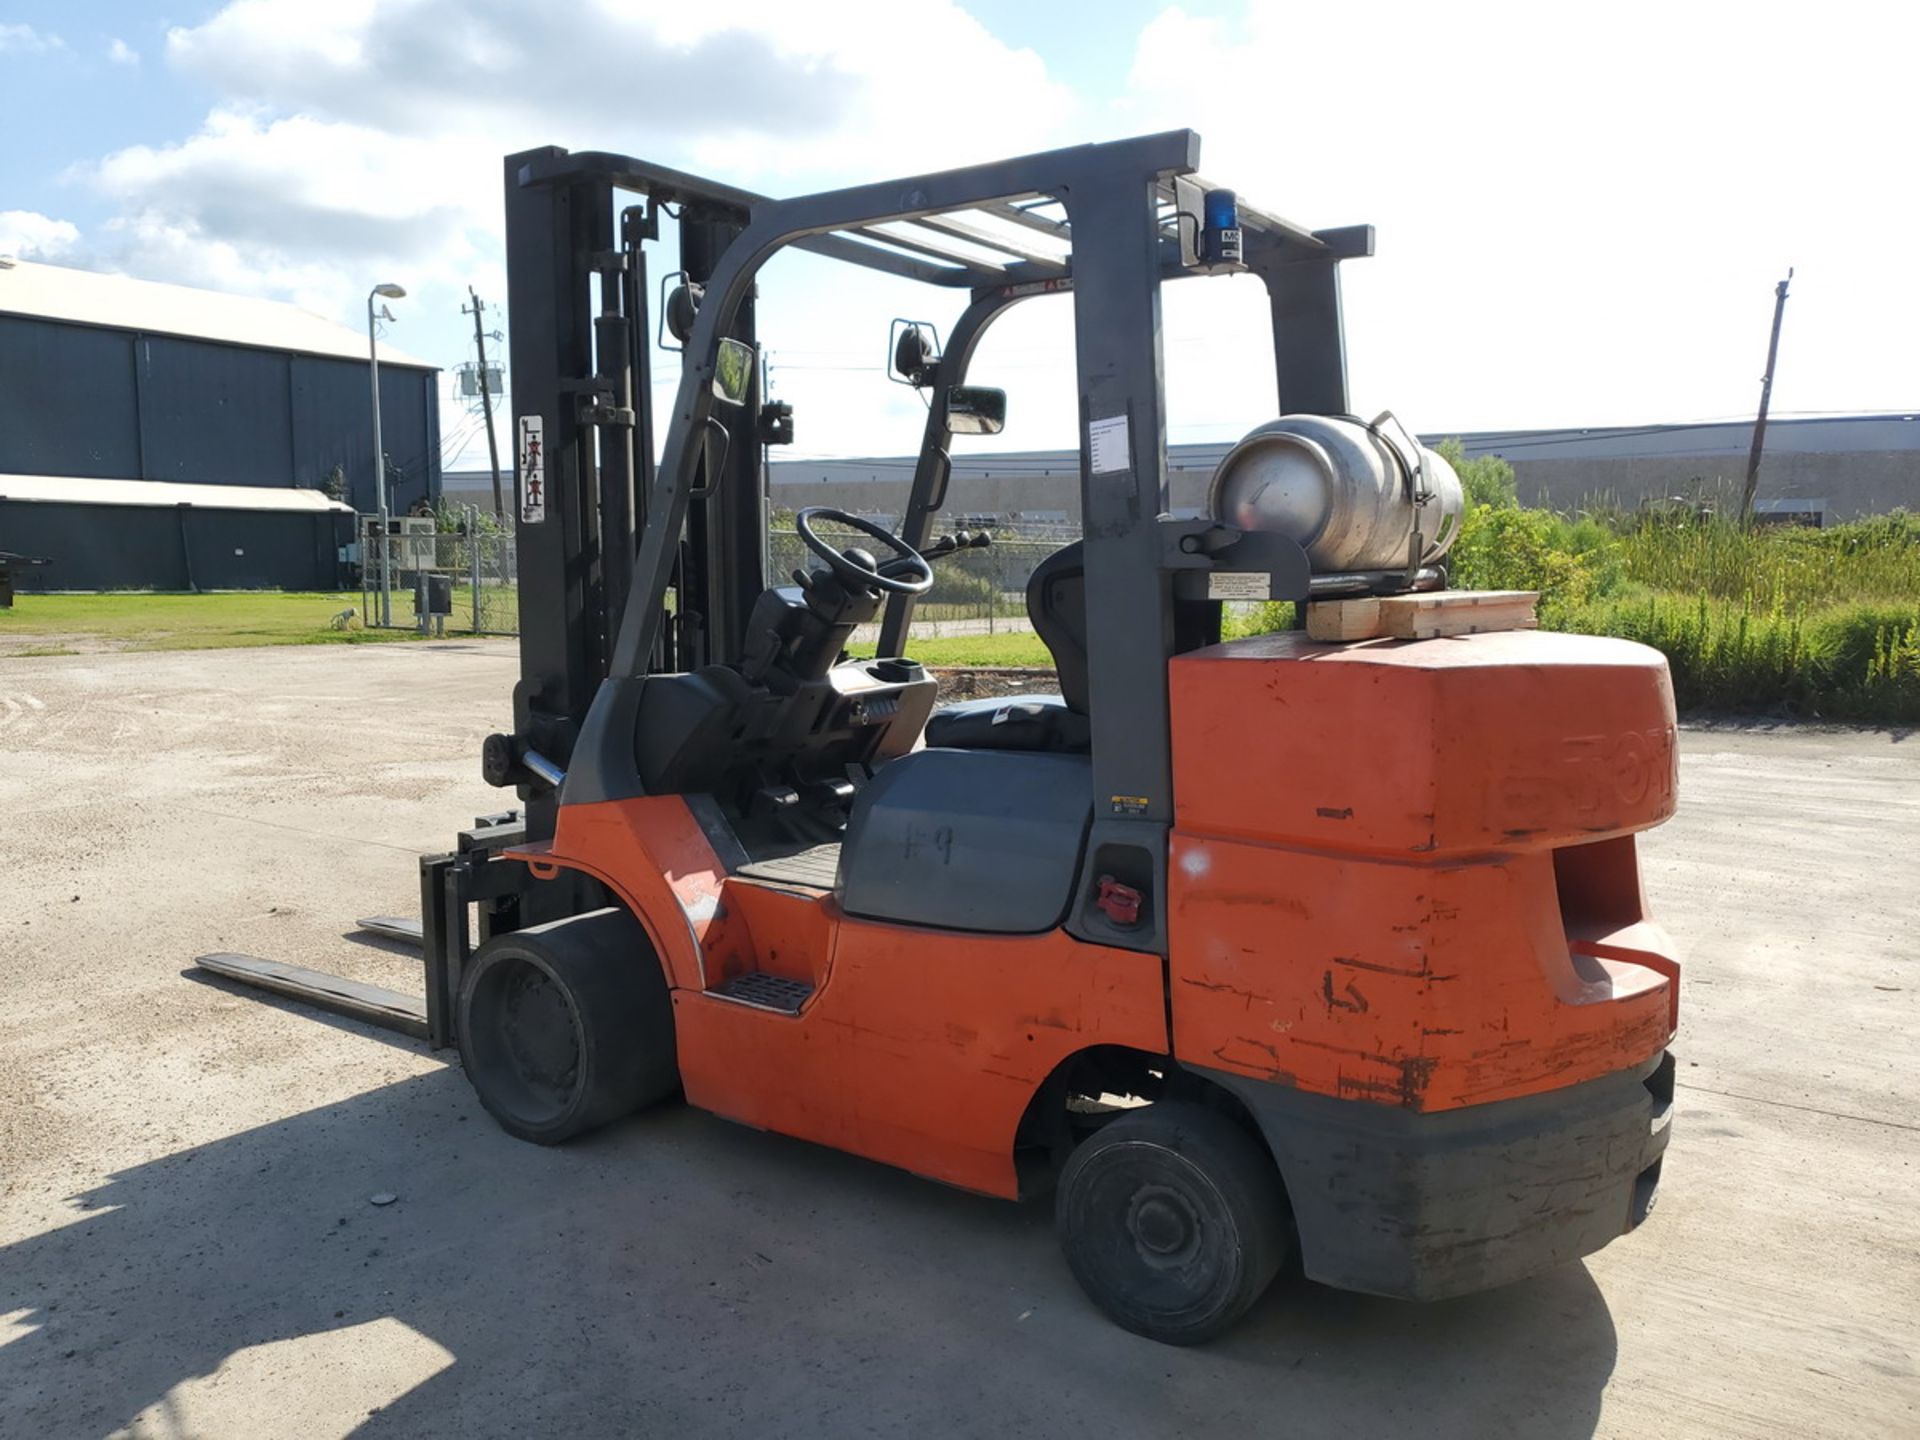 Toyota Forklift W/ Side Shift, 2-Stage Mast, 9, 150 Cap., 132" Max Lift Ht.; 60" Forks; 5, 760hrs - Image 4 of 9